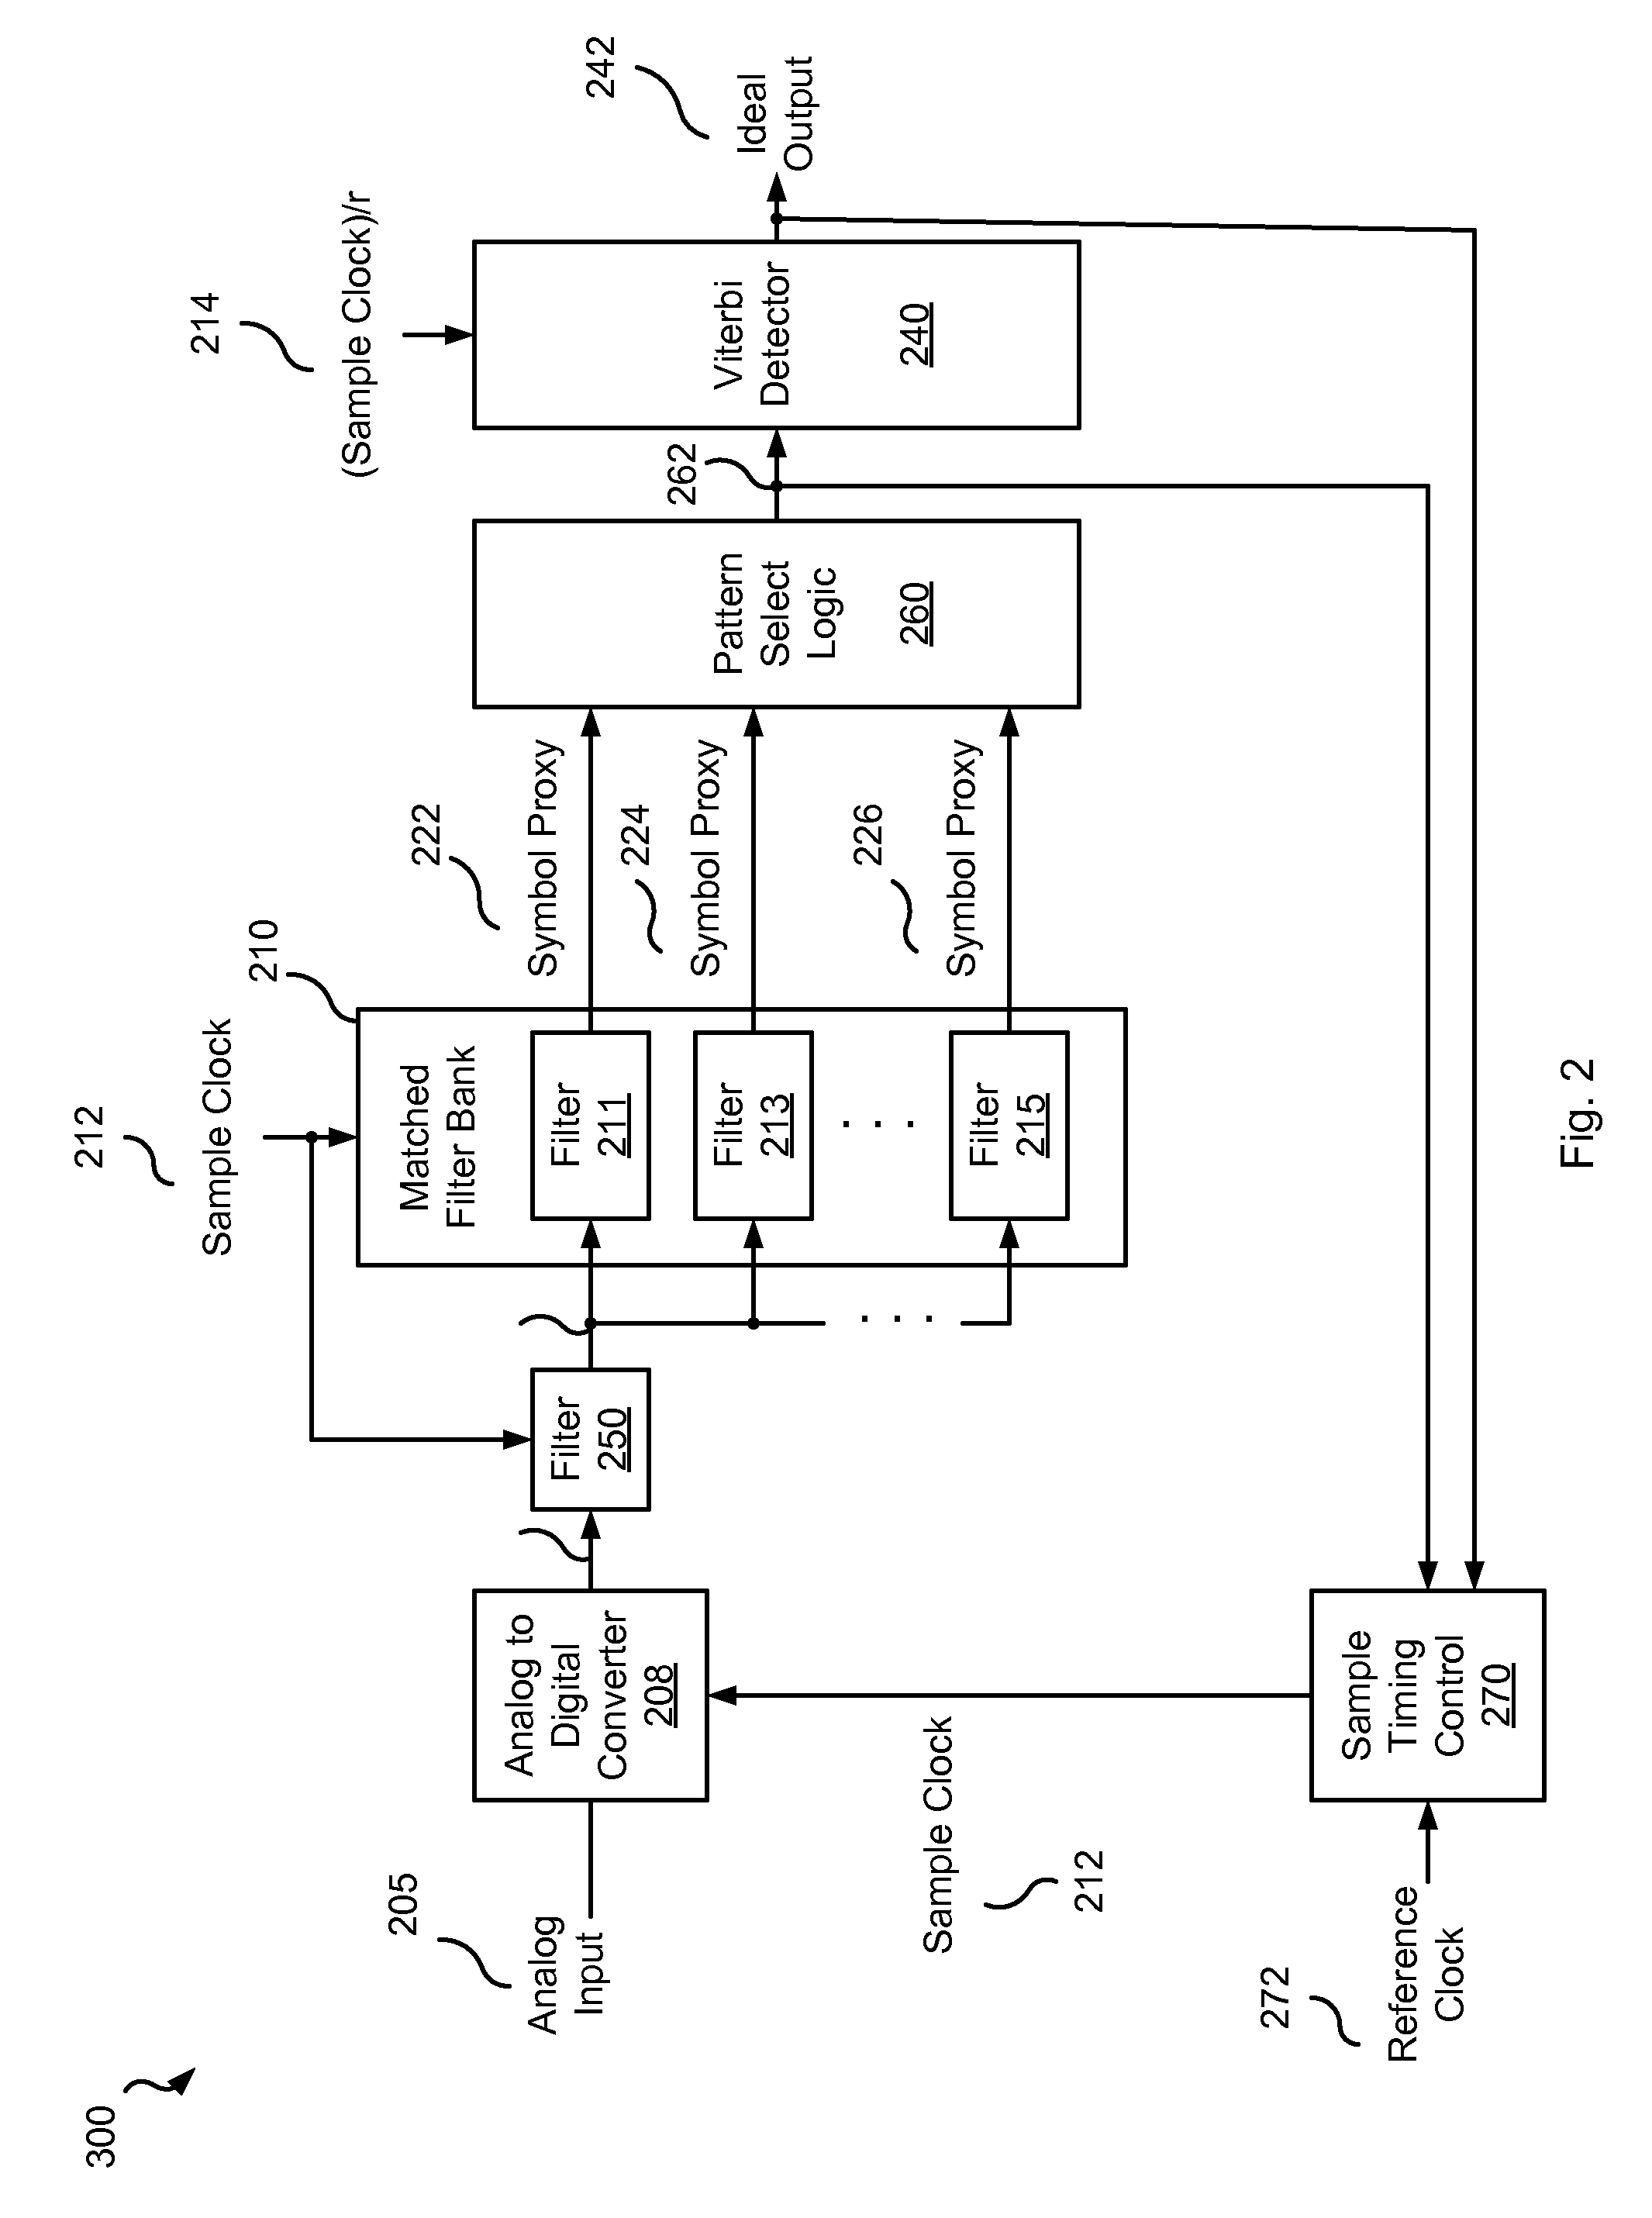 Reduced Frequency Data Processing Using a Matched Filter Set Front End